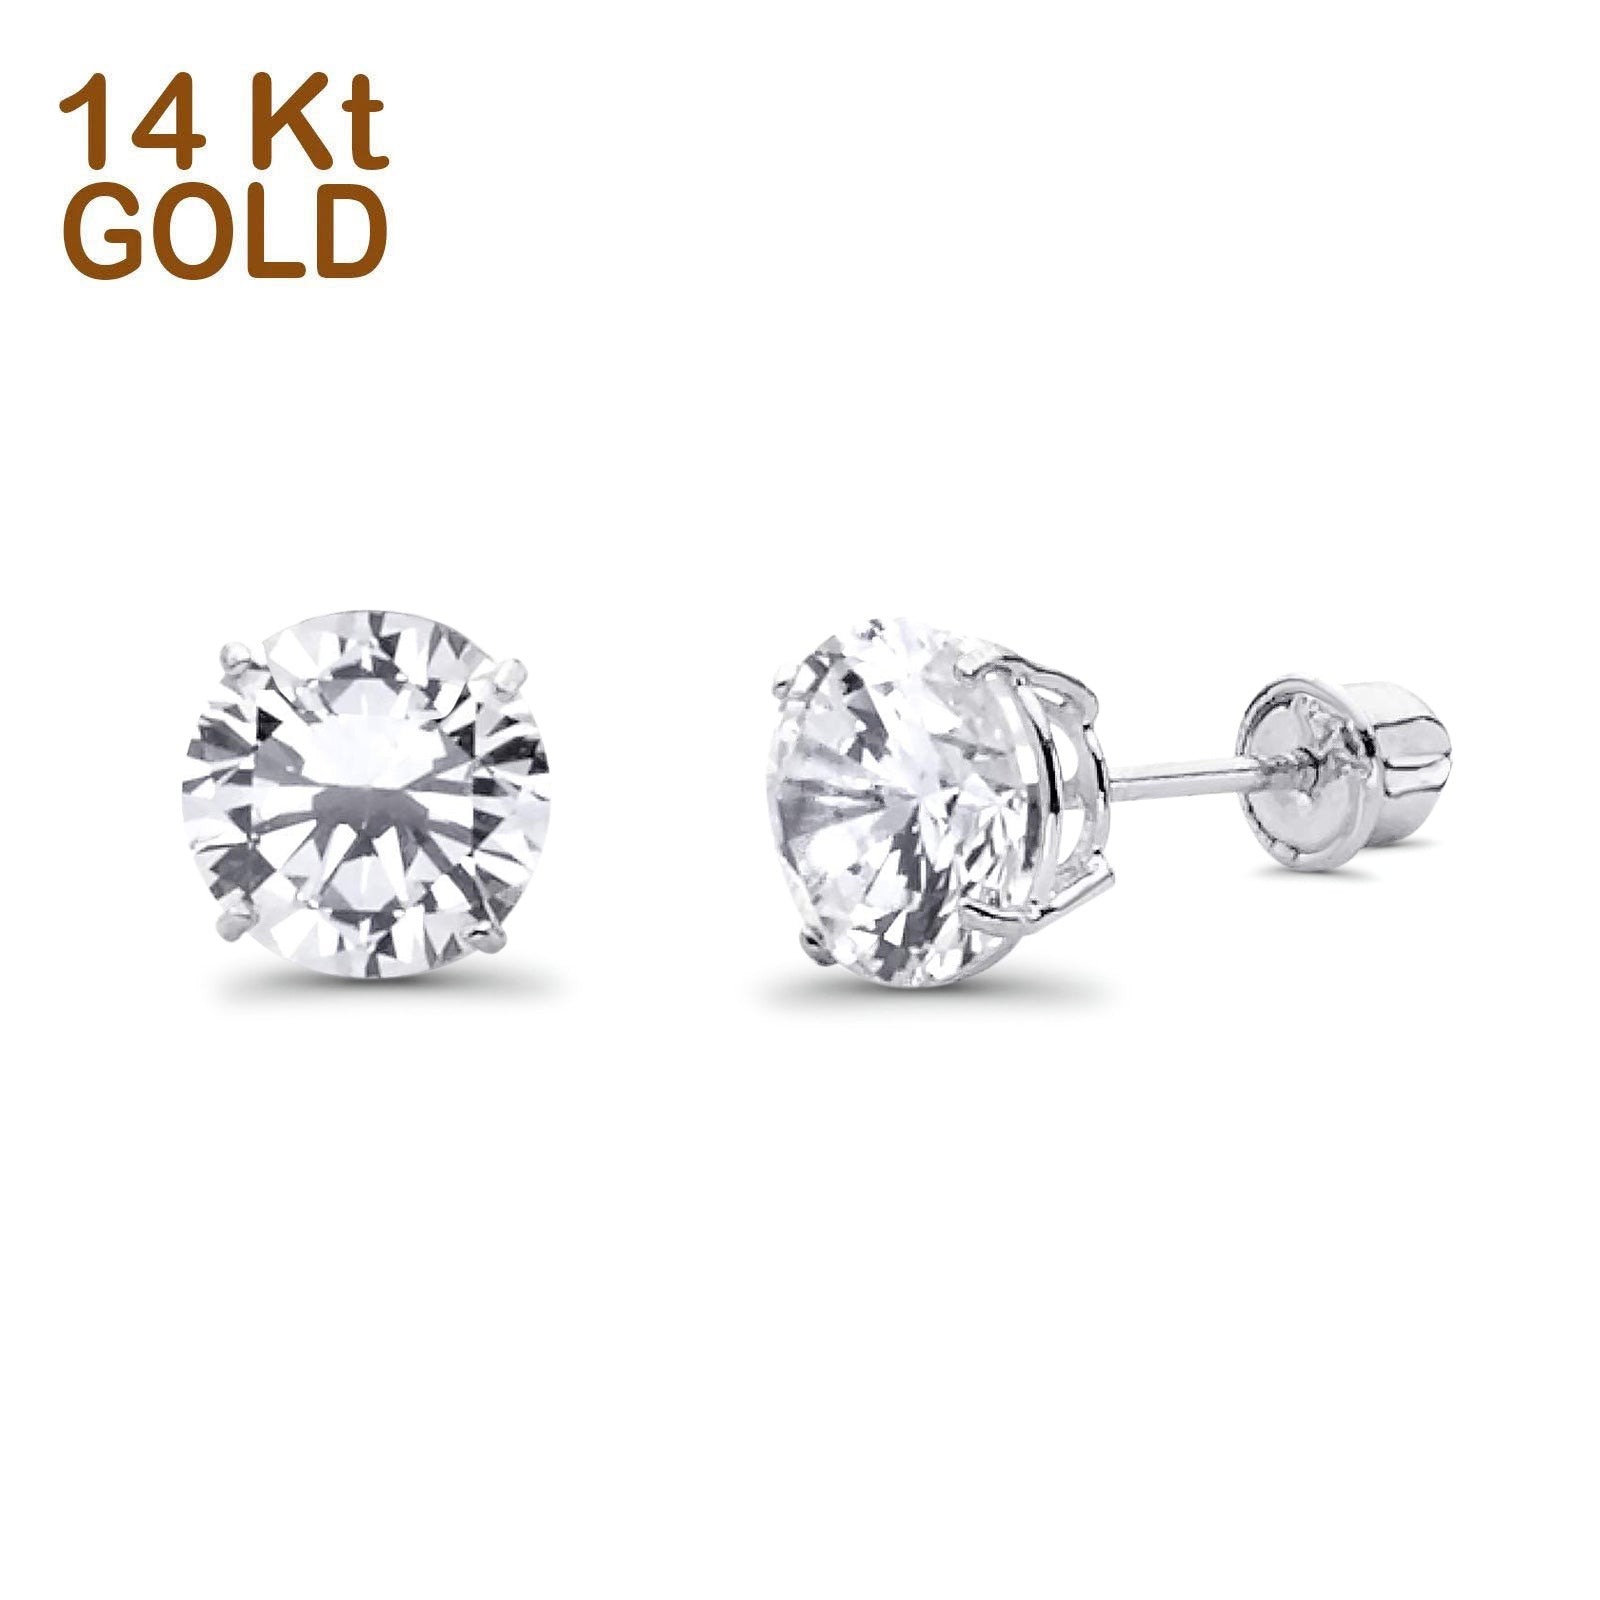 14K White Gold Round Solitaire Basket Set Stud Earrings with Screw Back - 3 Different Size Available, Best Anniversary Birthday Gift for Her